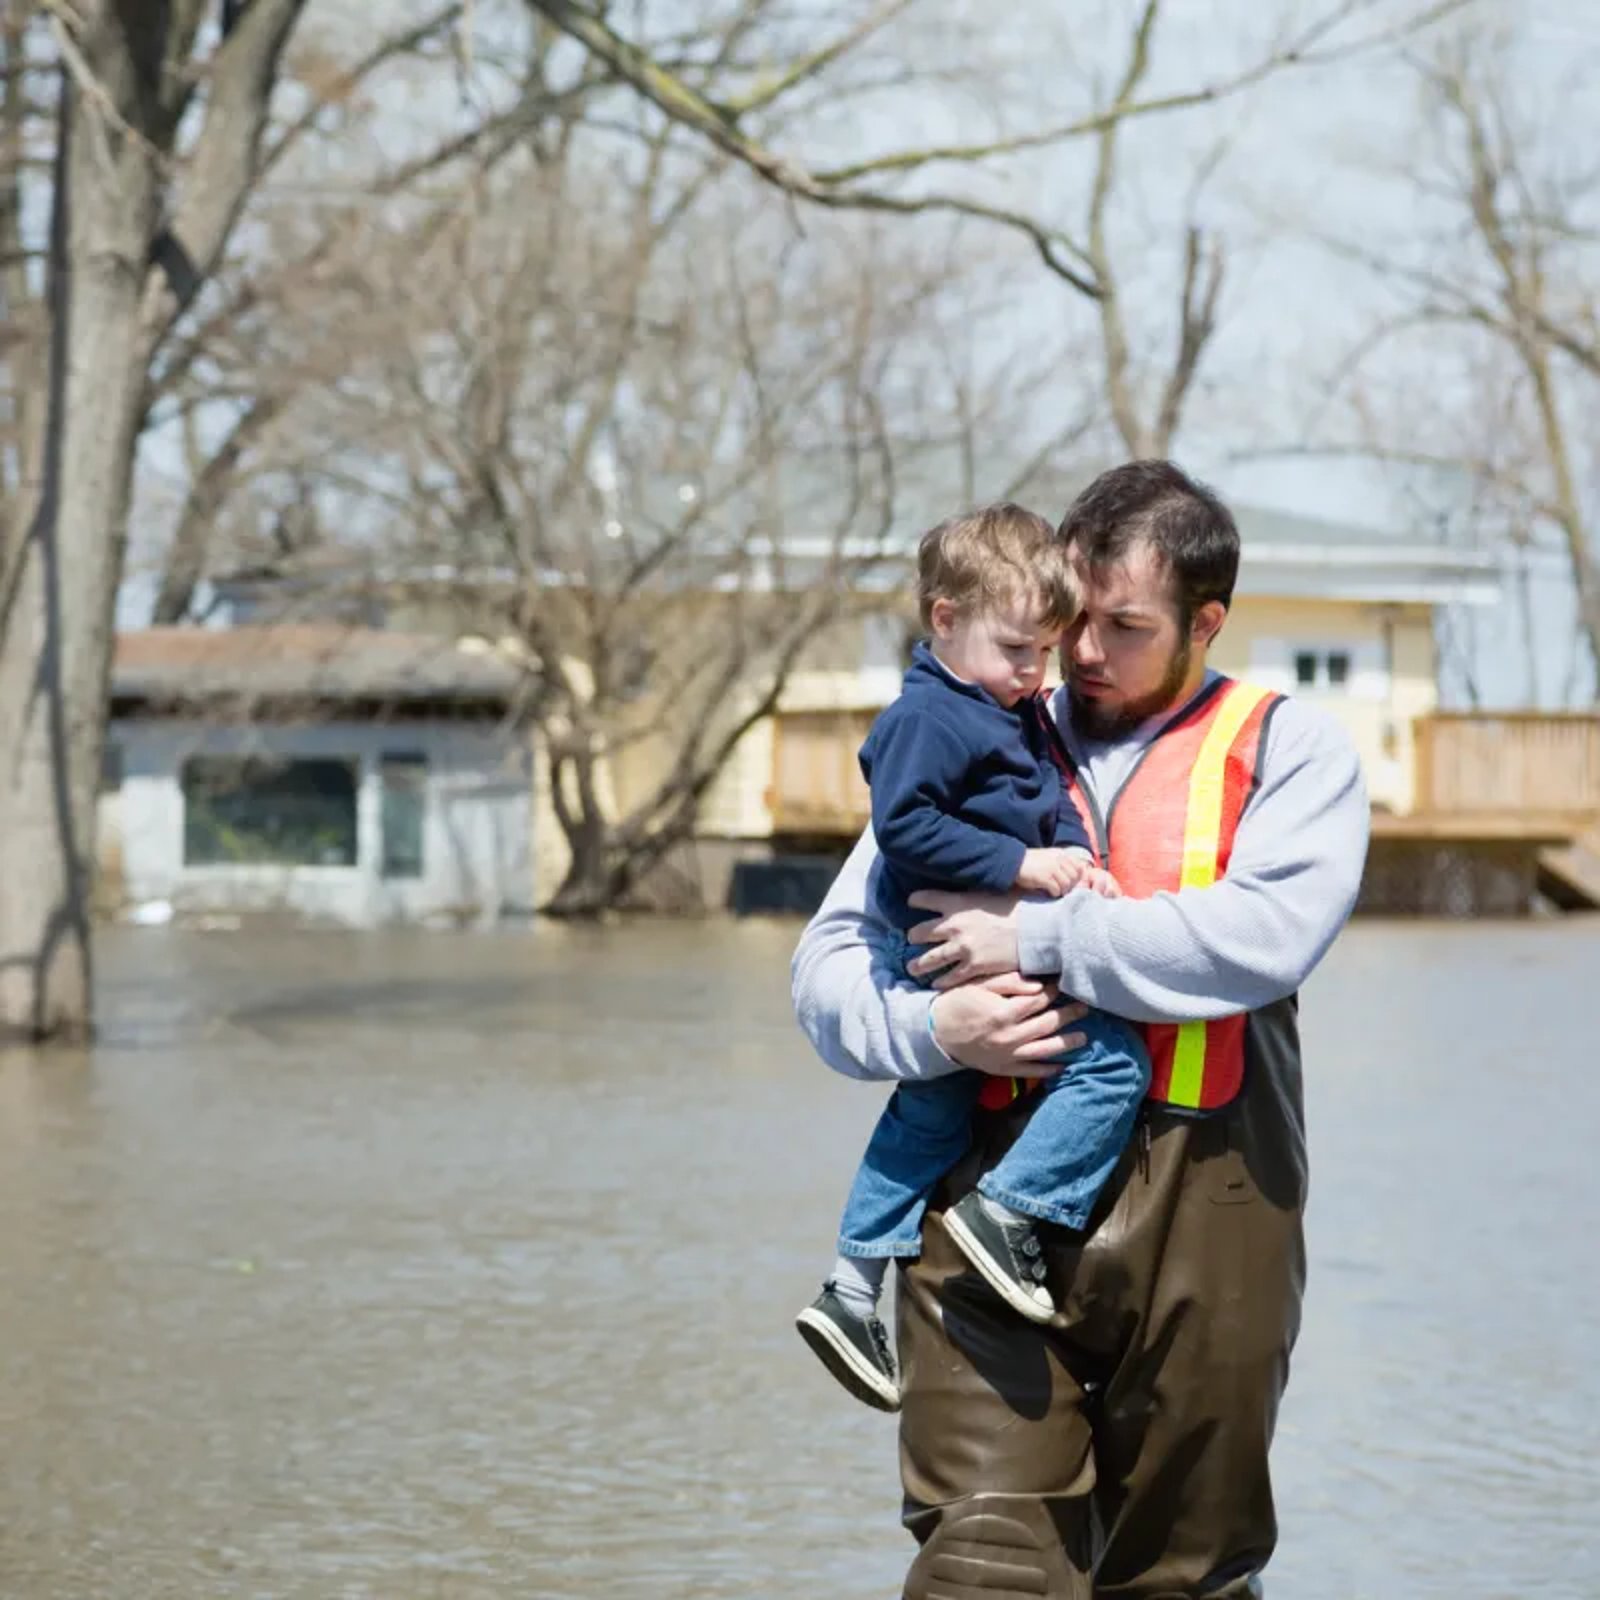 USA, Illinois, Man with son wading in floodwaters